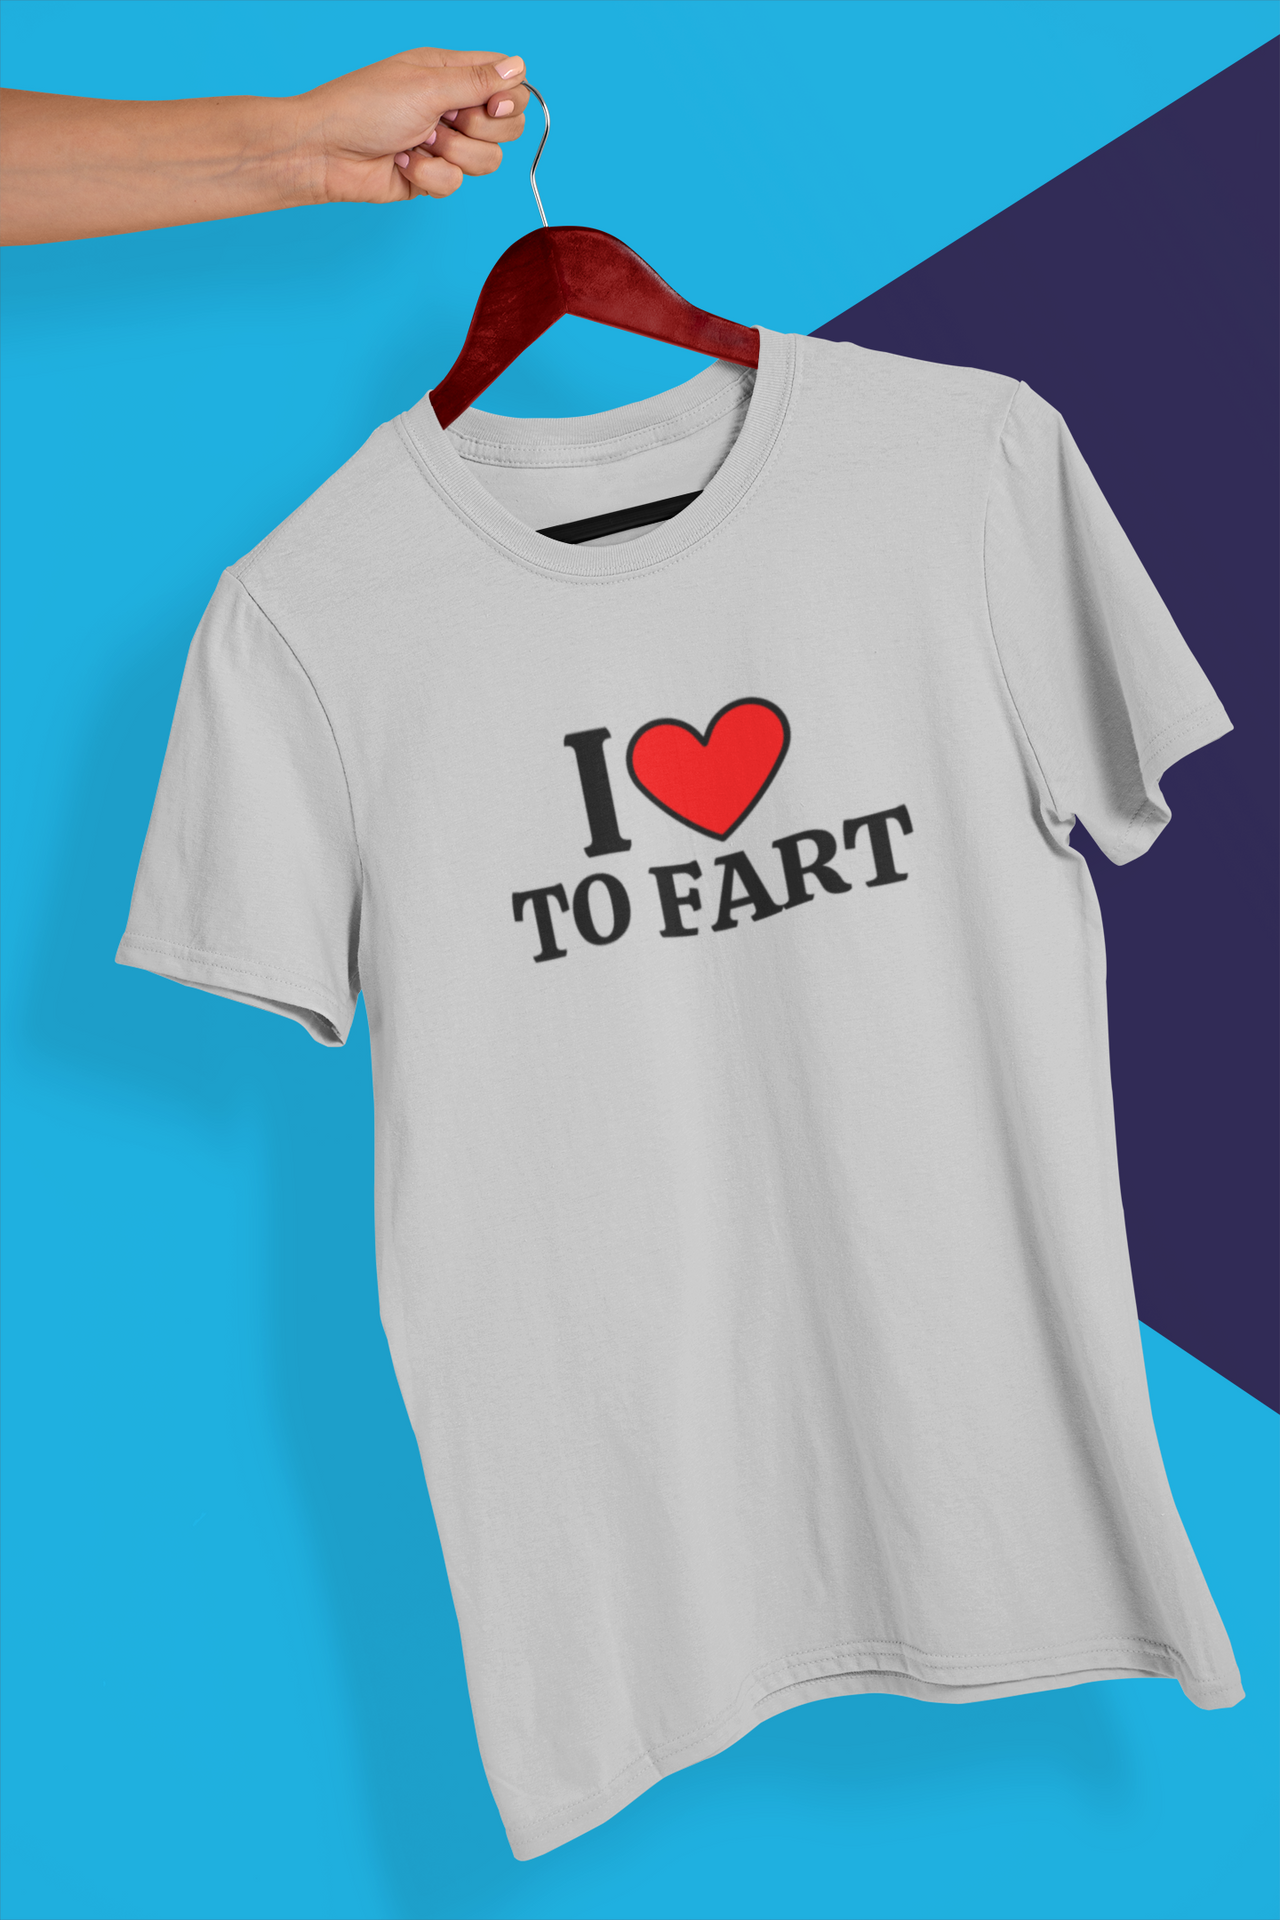 I LOVE TO FART Unisex Heavy Cotton Tee (T-shirt)  ADULT